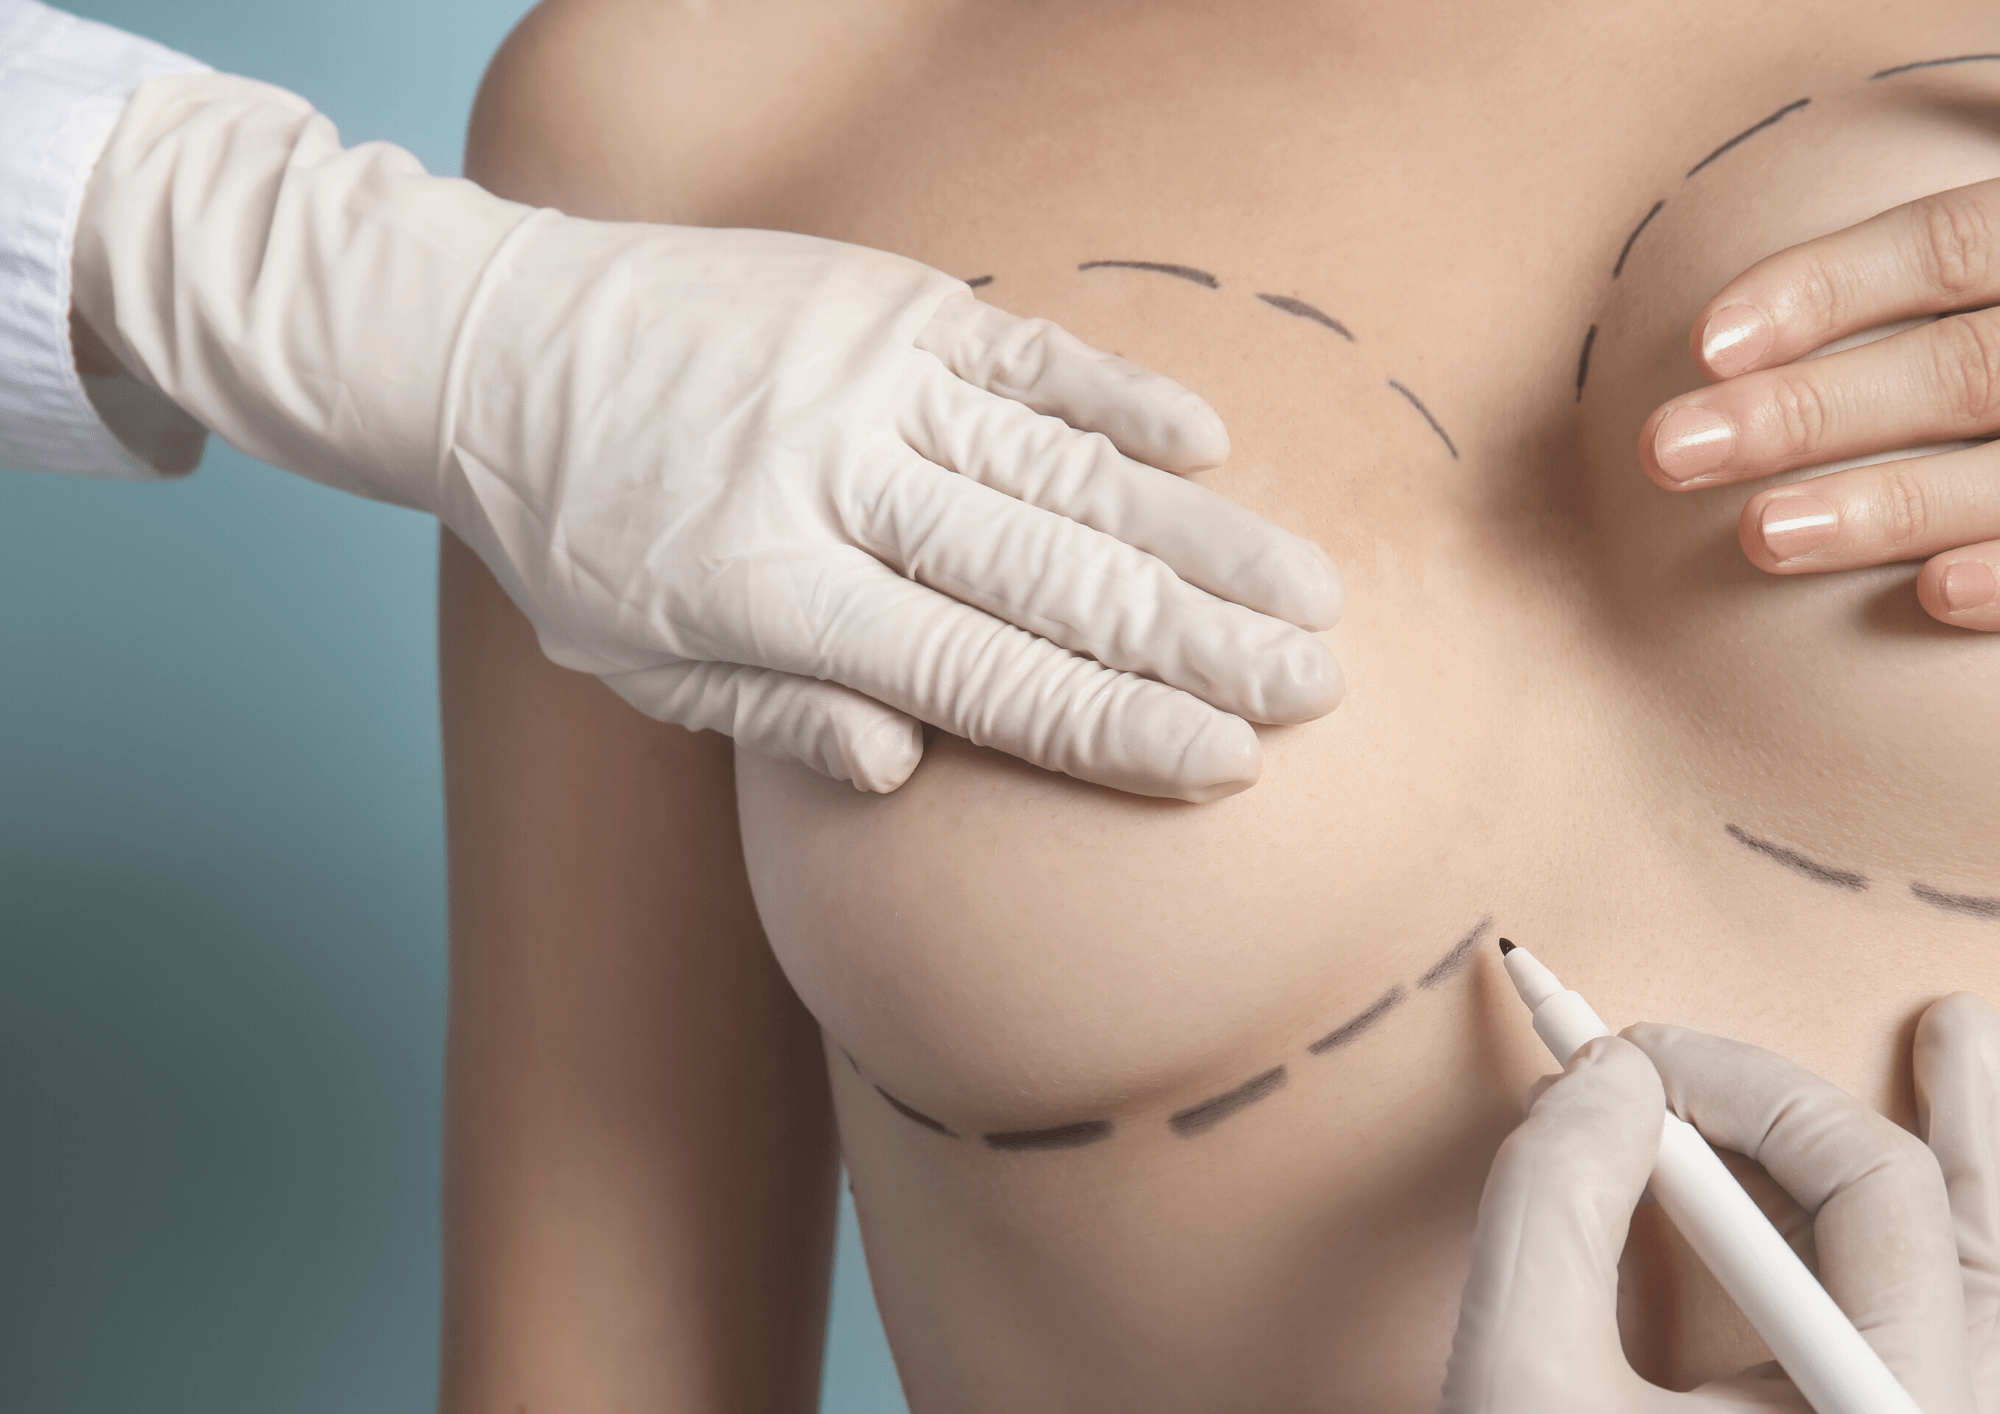 Breastfeeding after breast augmentation surgery, Cosmetic Journey